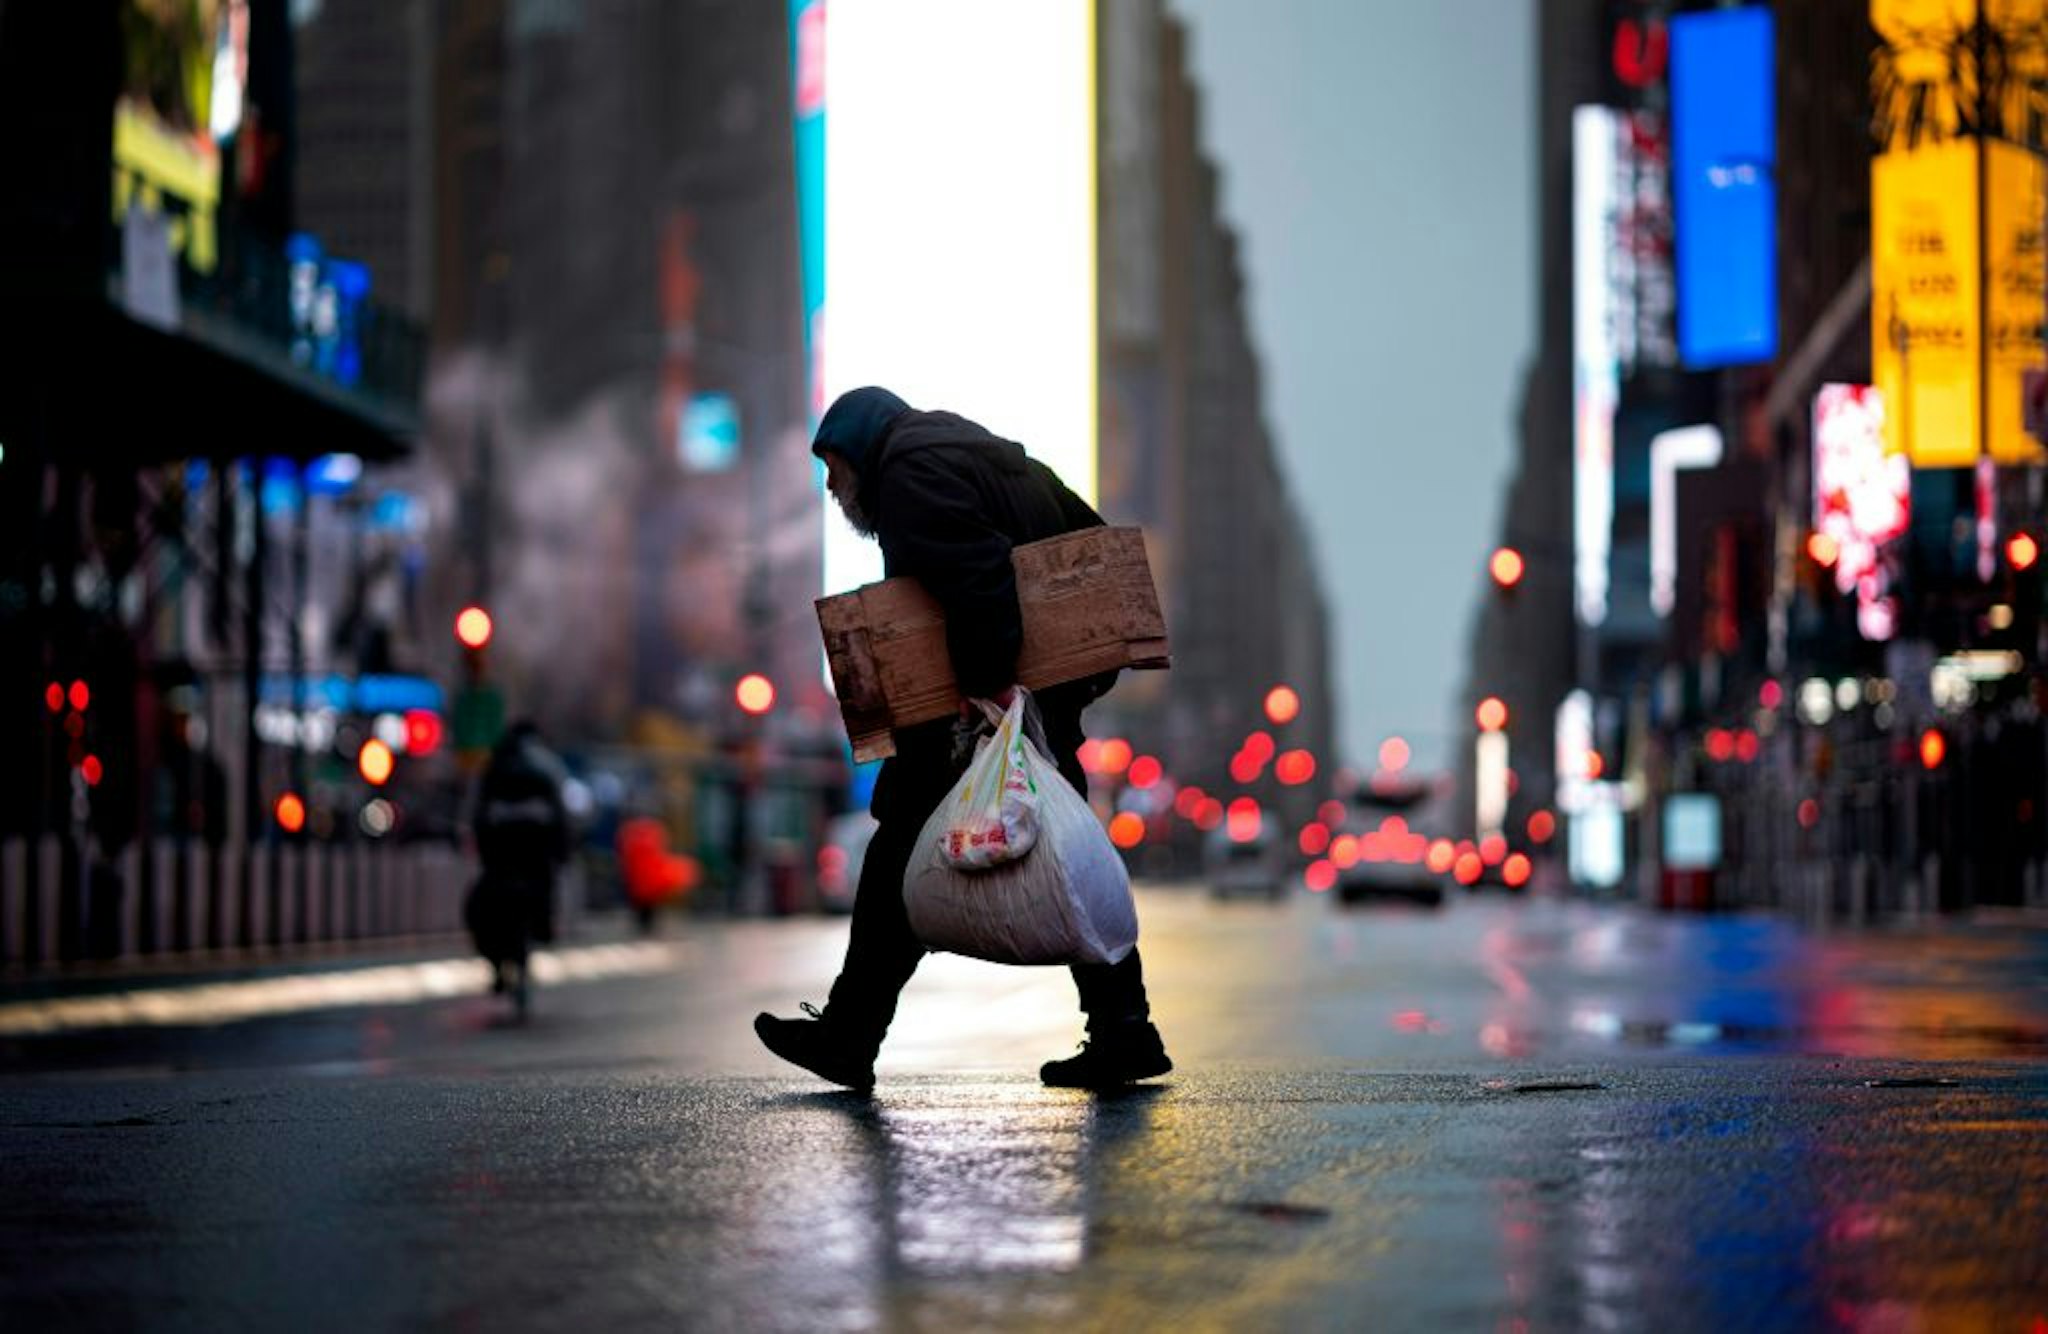 A homeless man carries cardboard as he crosses the almost deserted Times Square on April 13, 2020 in New York City. - New York's governor declared April 13, 2020 that the "worst is over" for its coronavirus outbreak providing the state moves sensibly, despite reporting its death toll had passed 10,000. Andrew Cuomo said lower average hospitalization rates and intubations suggested a "plateauing" of the epidemic and that he was working on a plan to gradually reopen the economy. (Photo by Johannes EISELE / AFP) (Photo by JOHANNES EISELE/AFP via Getty Images)